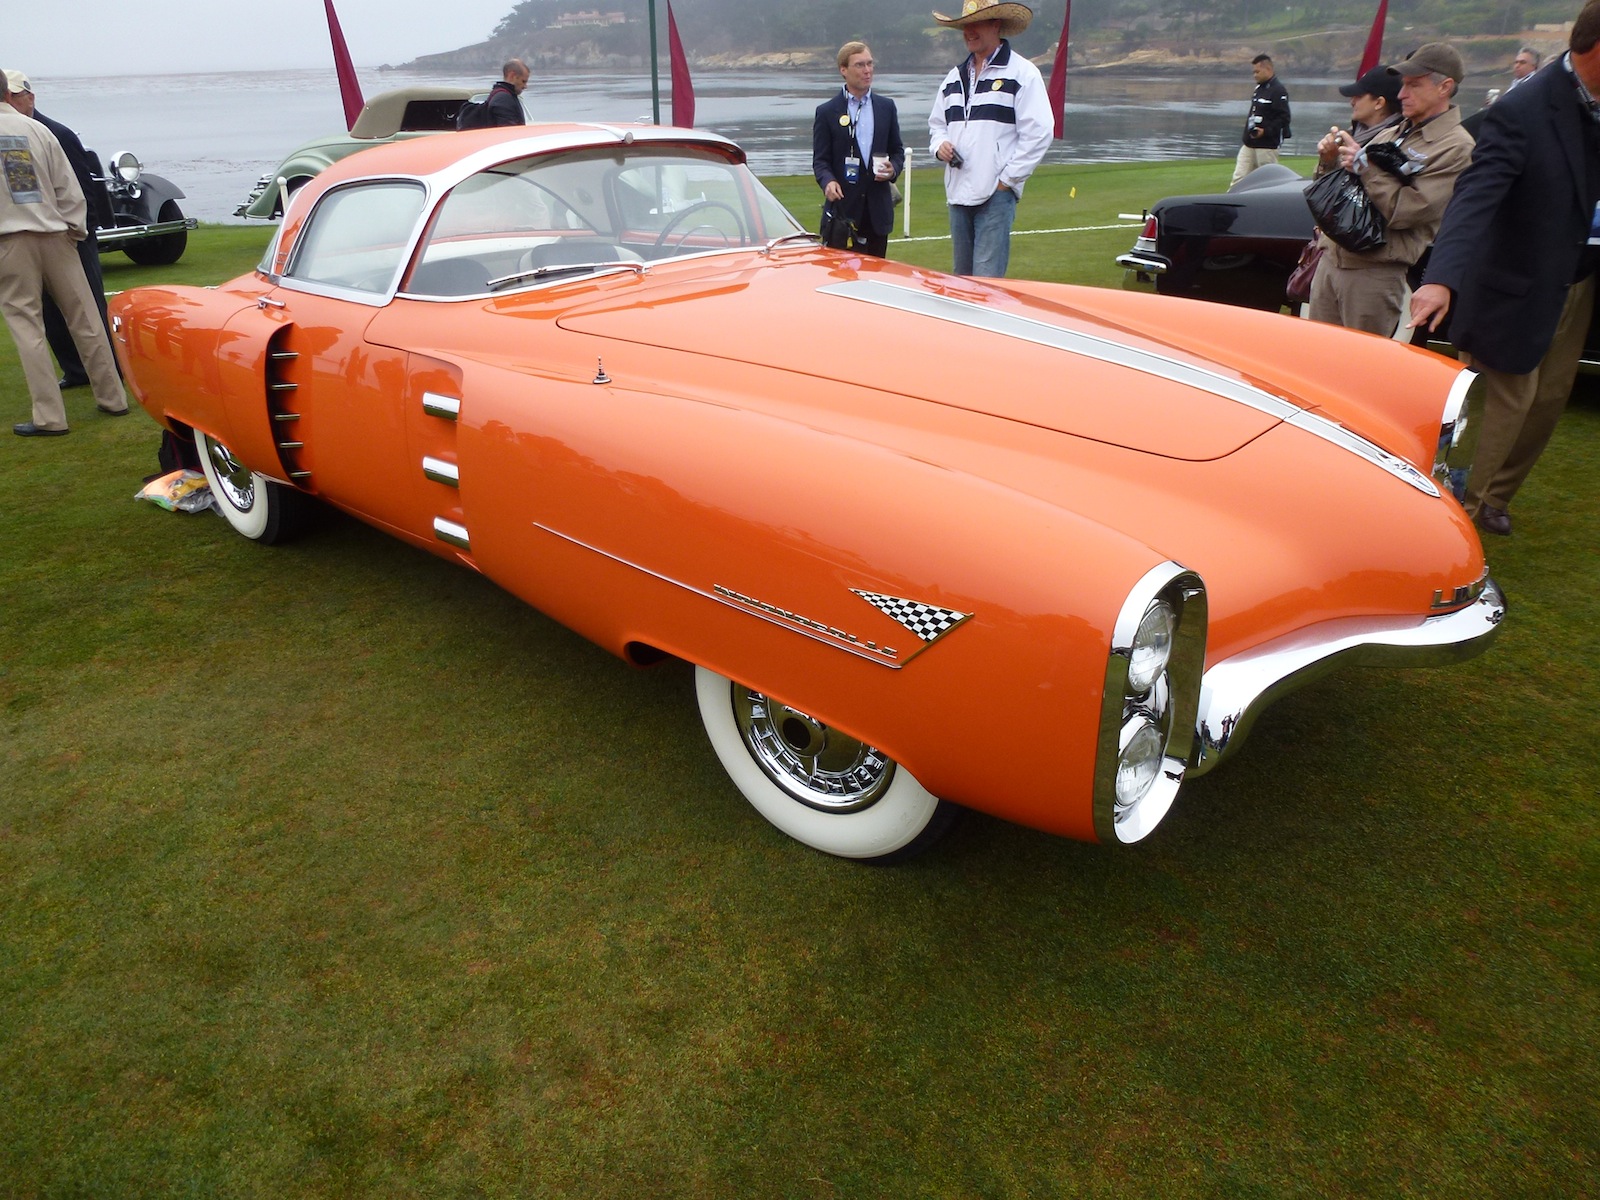 Lincoln Indianapolis Boano Coupe – An Elegant Classic Car At The Pebble Beach Concours d’Elegance